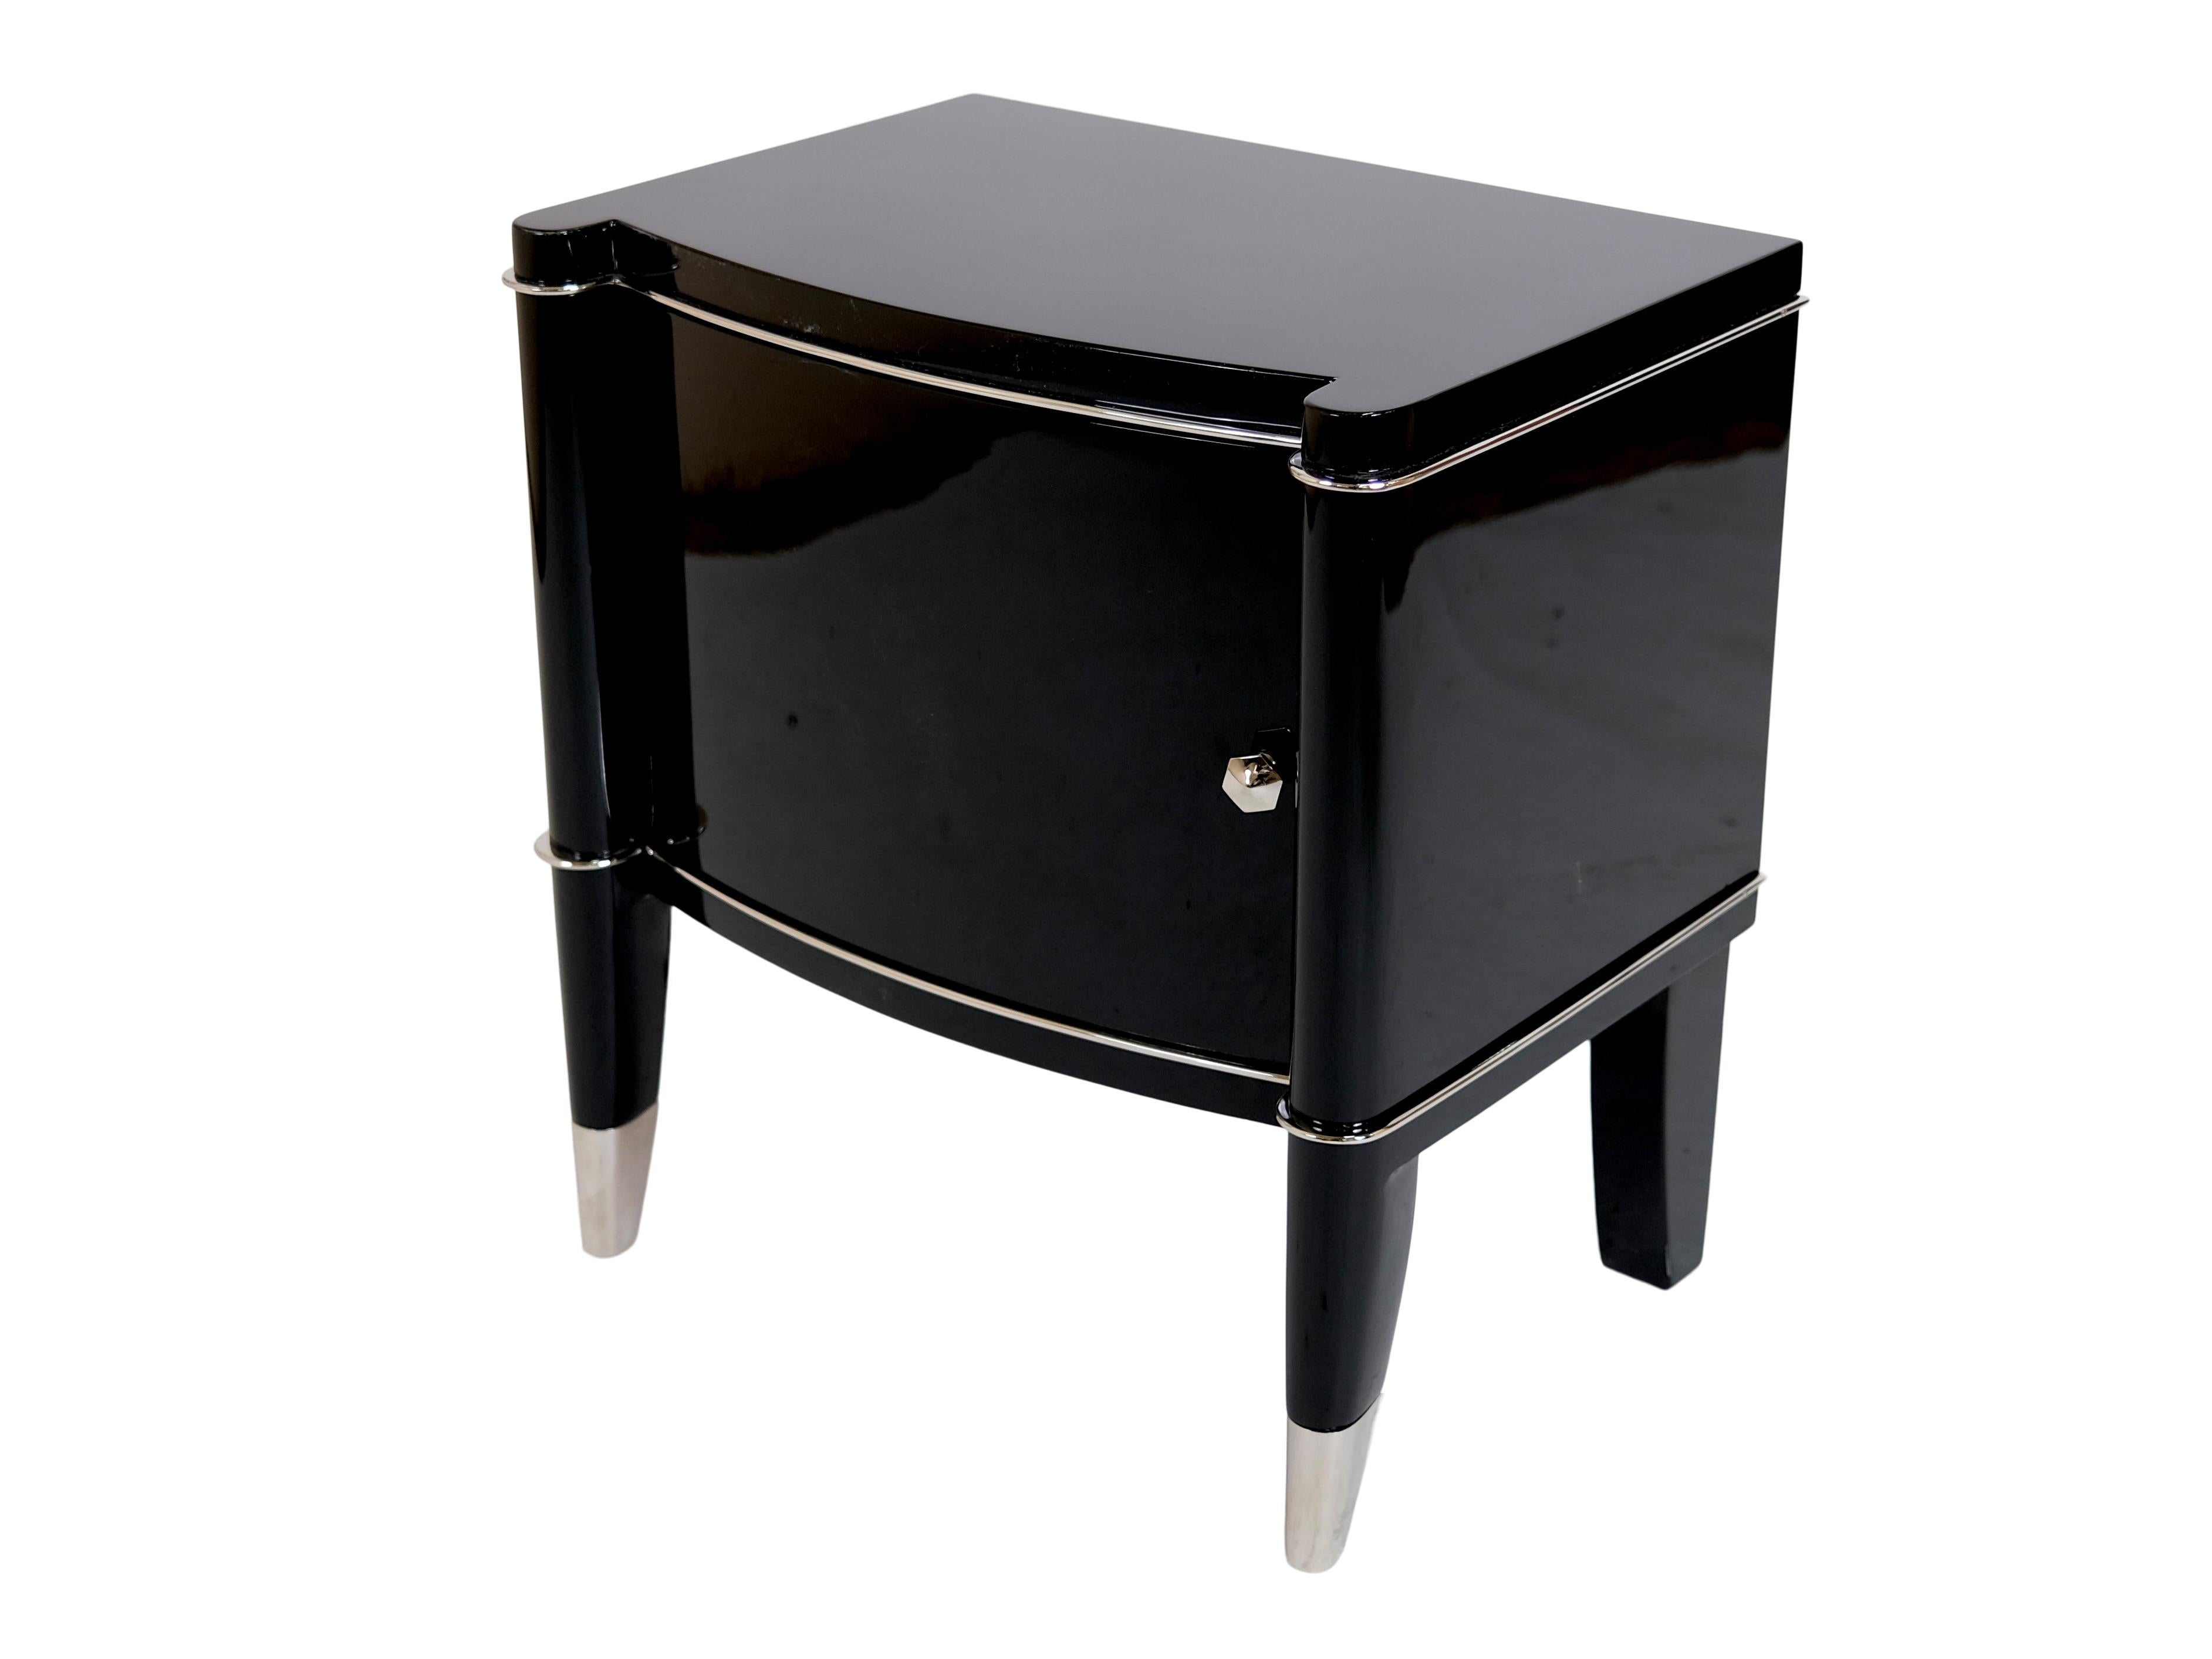 Blackened Pair of Art Deco Night Stands in Black Lacquer from De Coene Frères 1940s